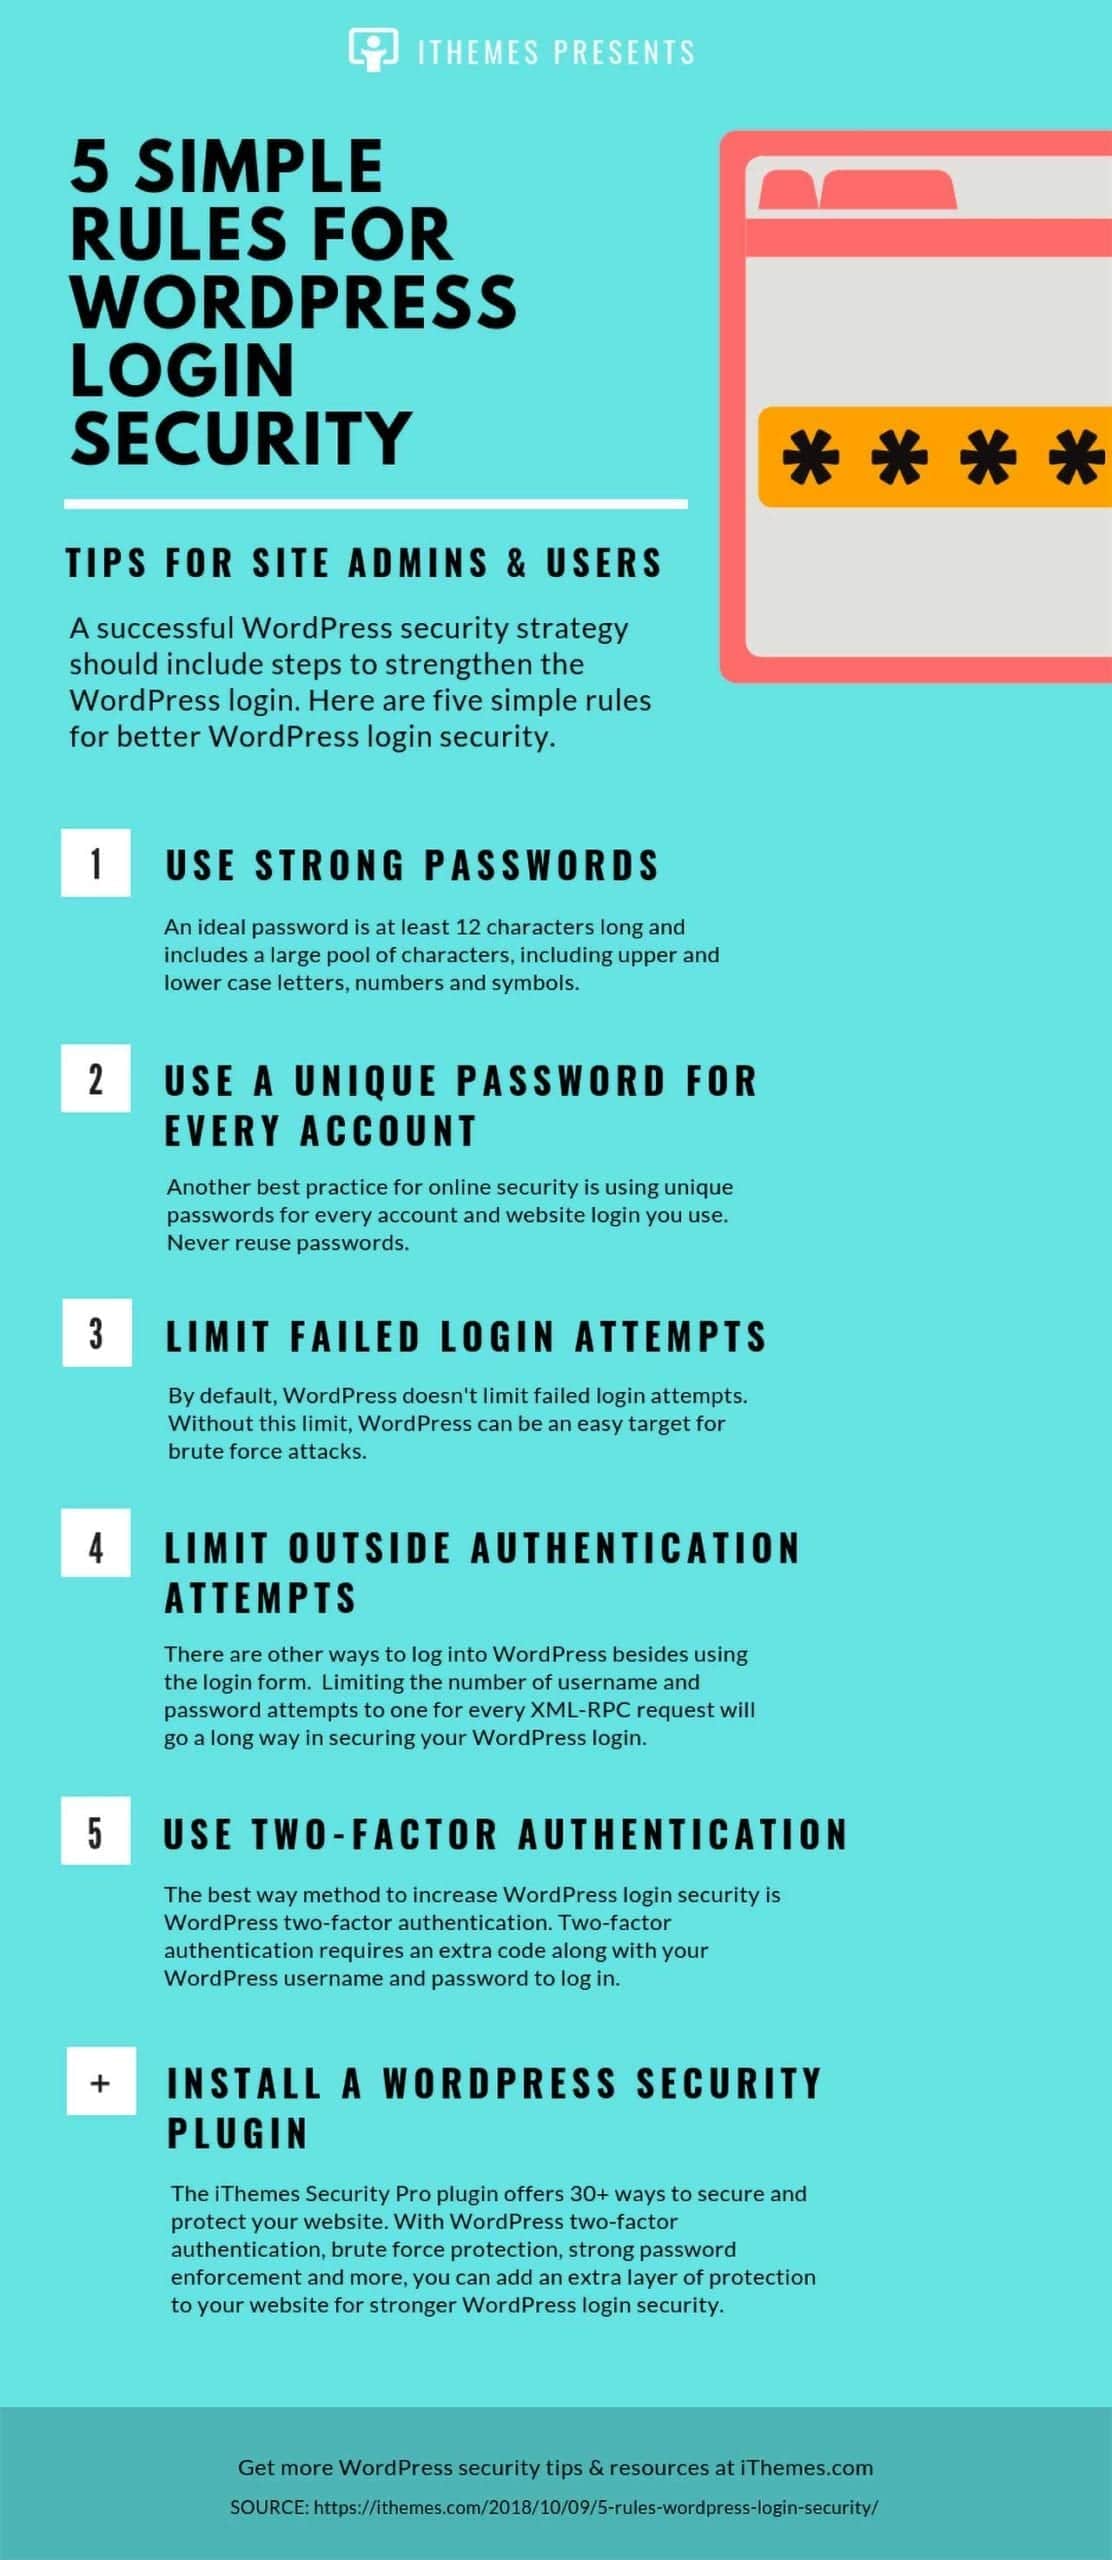 PixoLabo - 5 Simple Rules for WordPress Login Security - iThemes Infographic